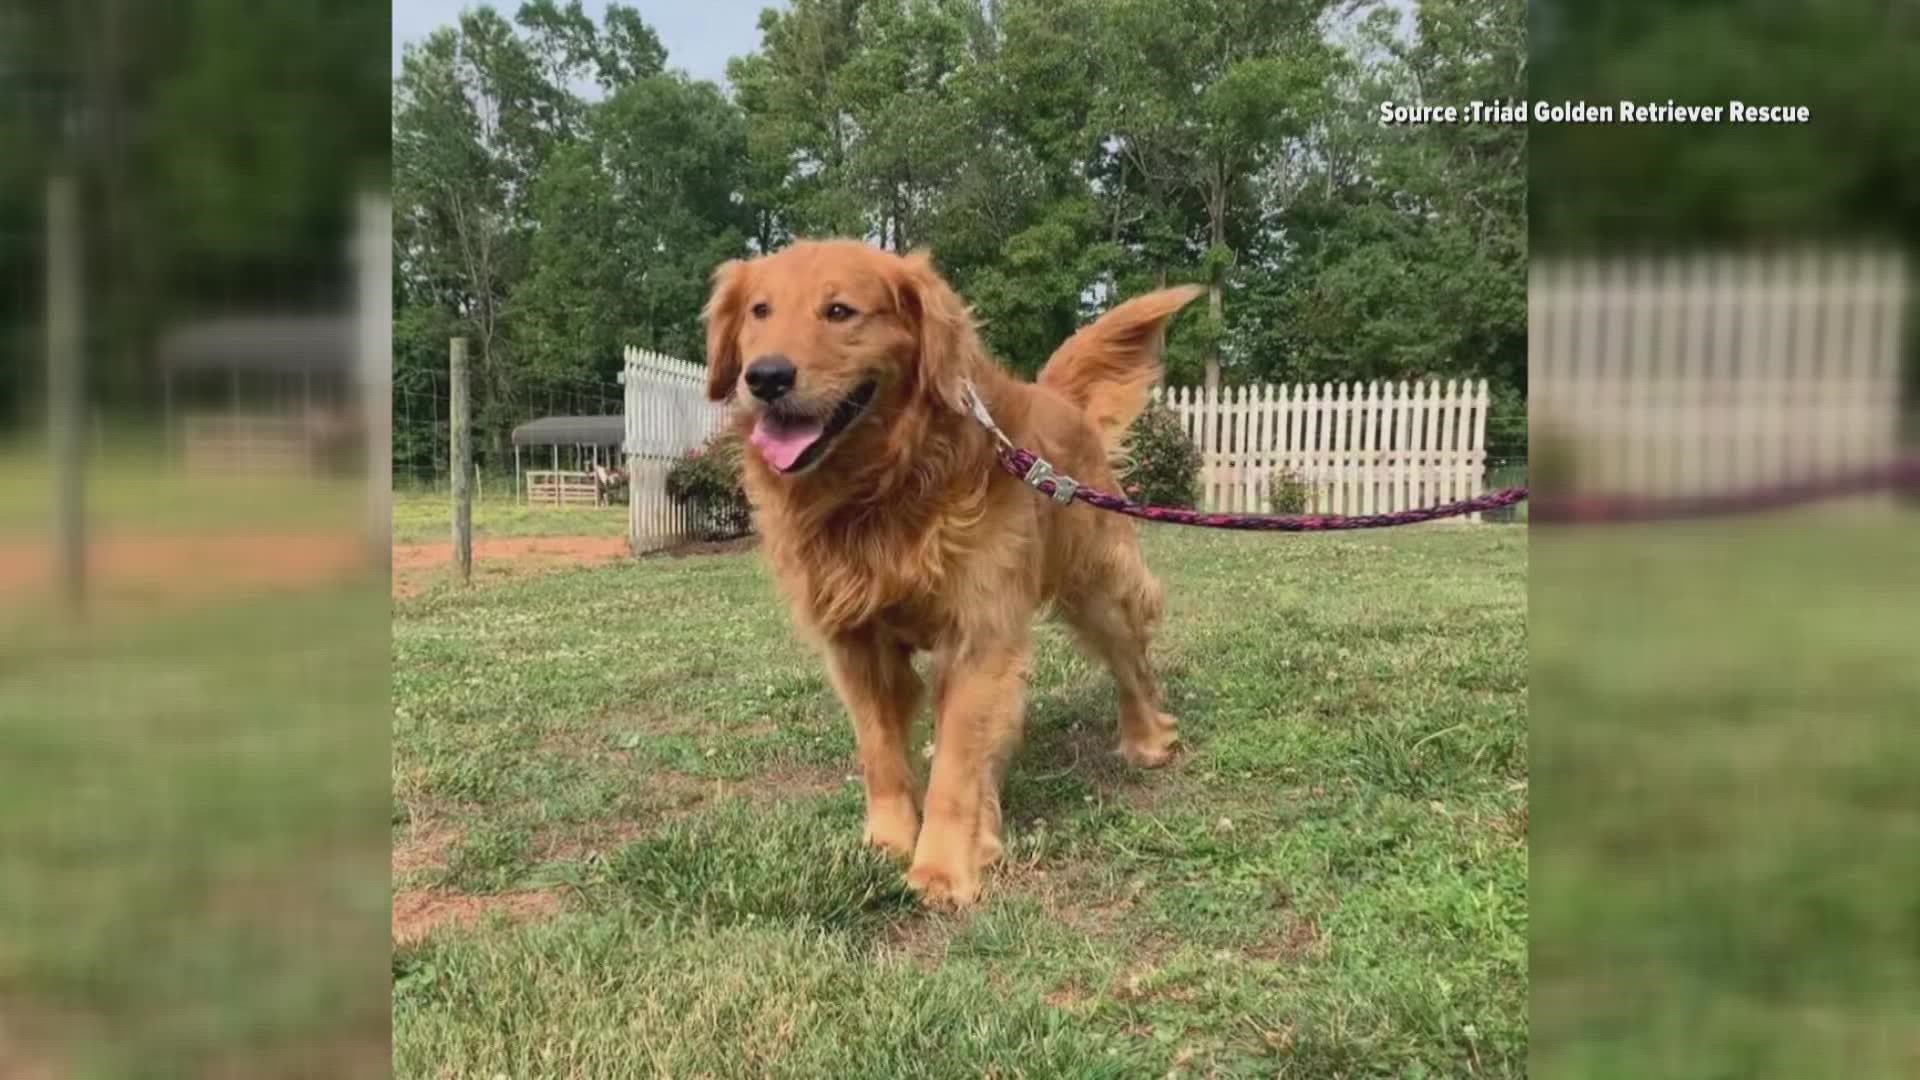 Diesel is an 8-year-old Golden Retriever. He loves people, does OK with other dogs, and isn't a big fan of cats.